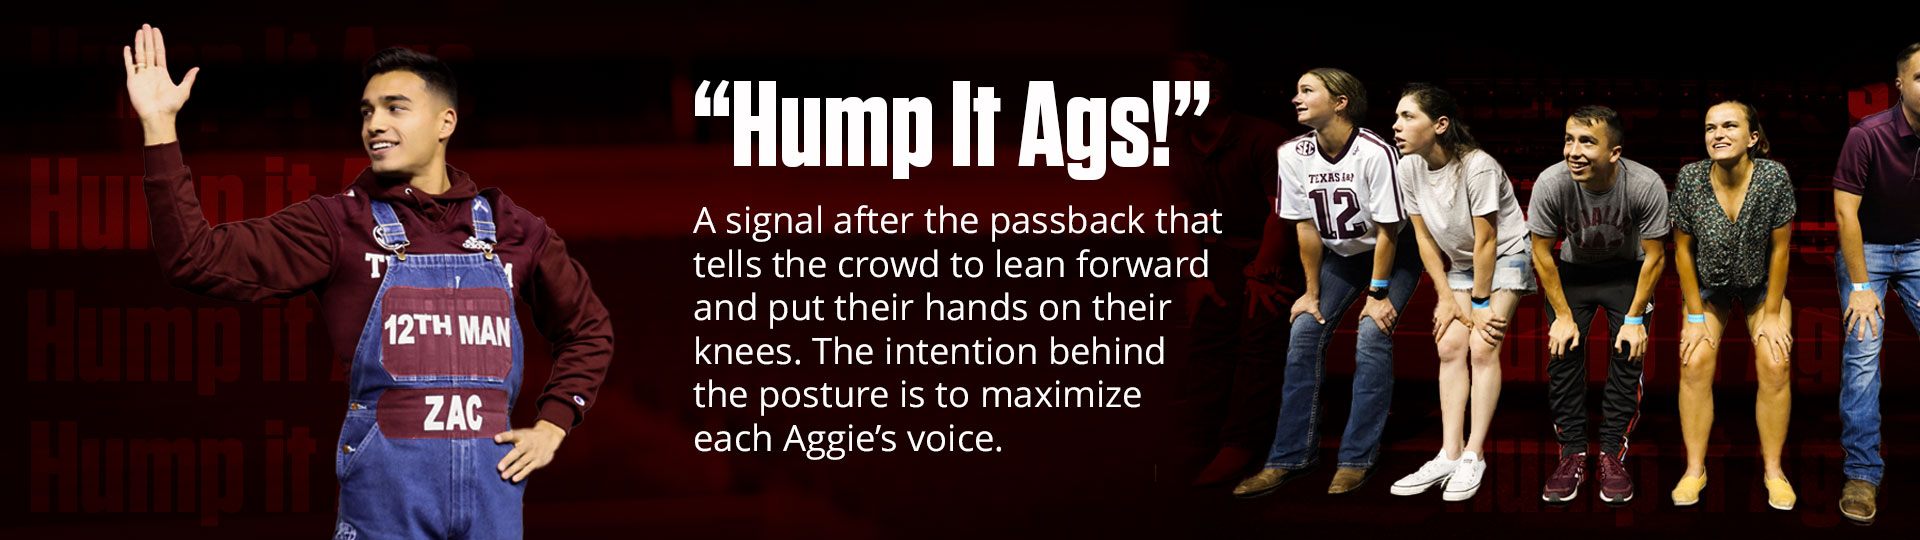 Graphic that reads "Hump it Ags! A signal after the passback that tells the crowd to lean forward and put their hands on their knees. The intention behind this posture is to maximize each Aggie's voice."